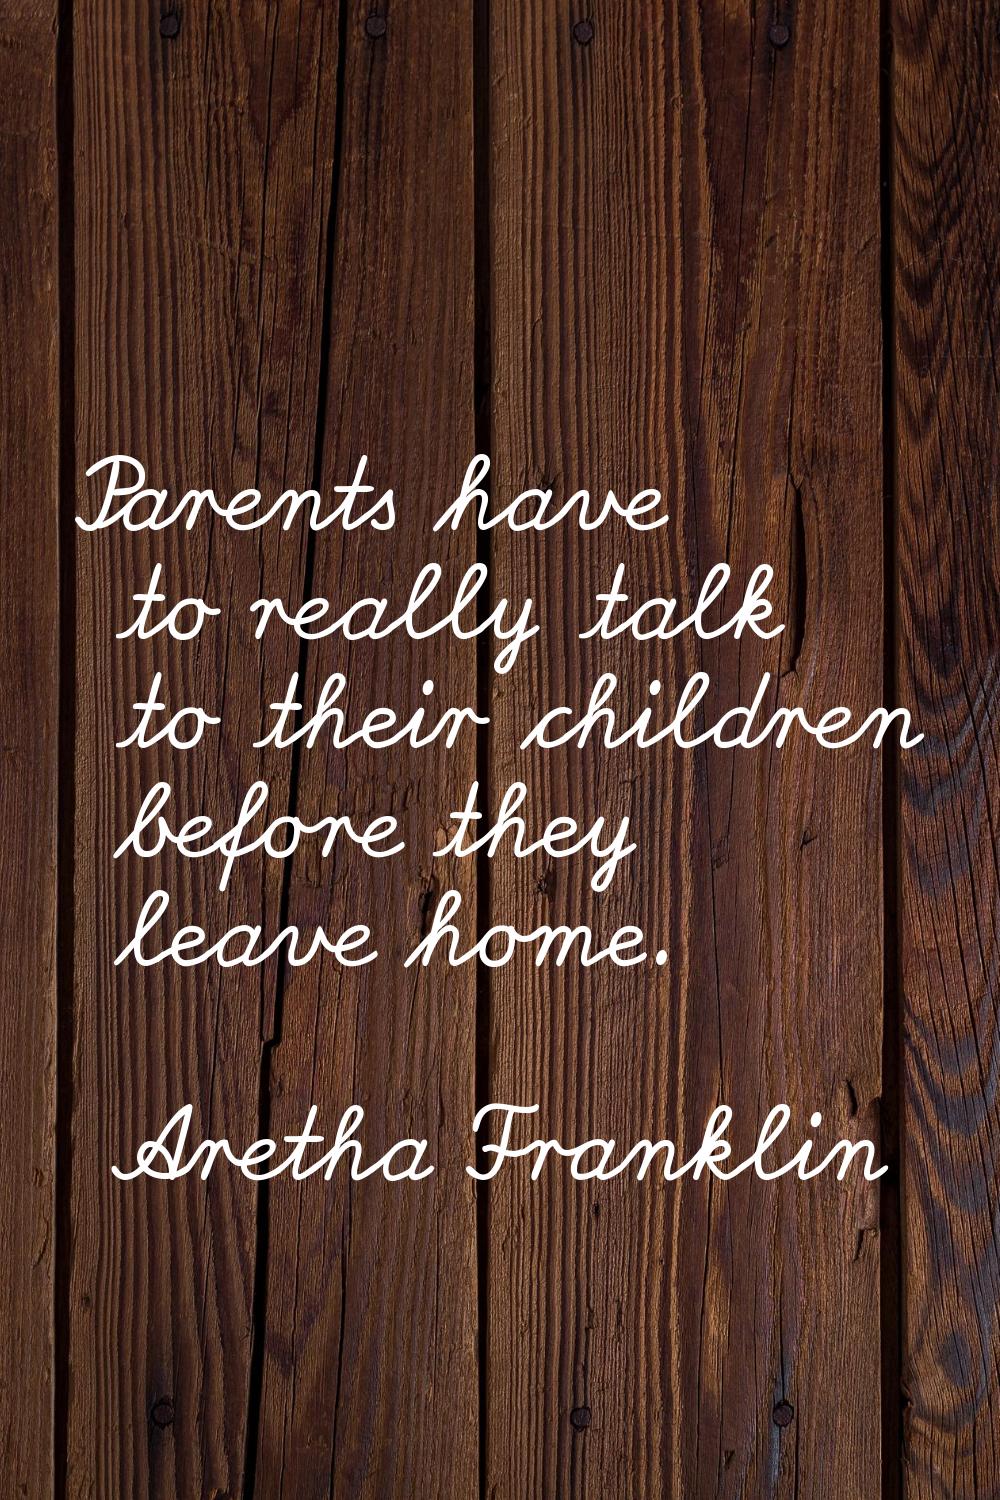 Parents have to really talk to their children before they leave home.